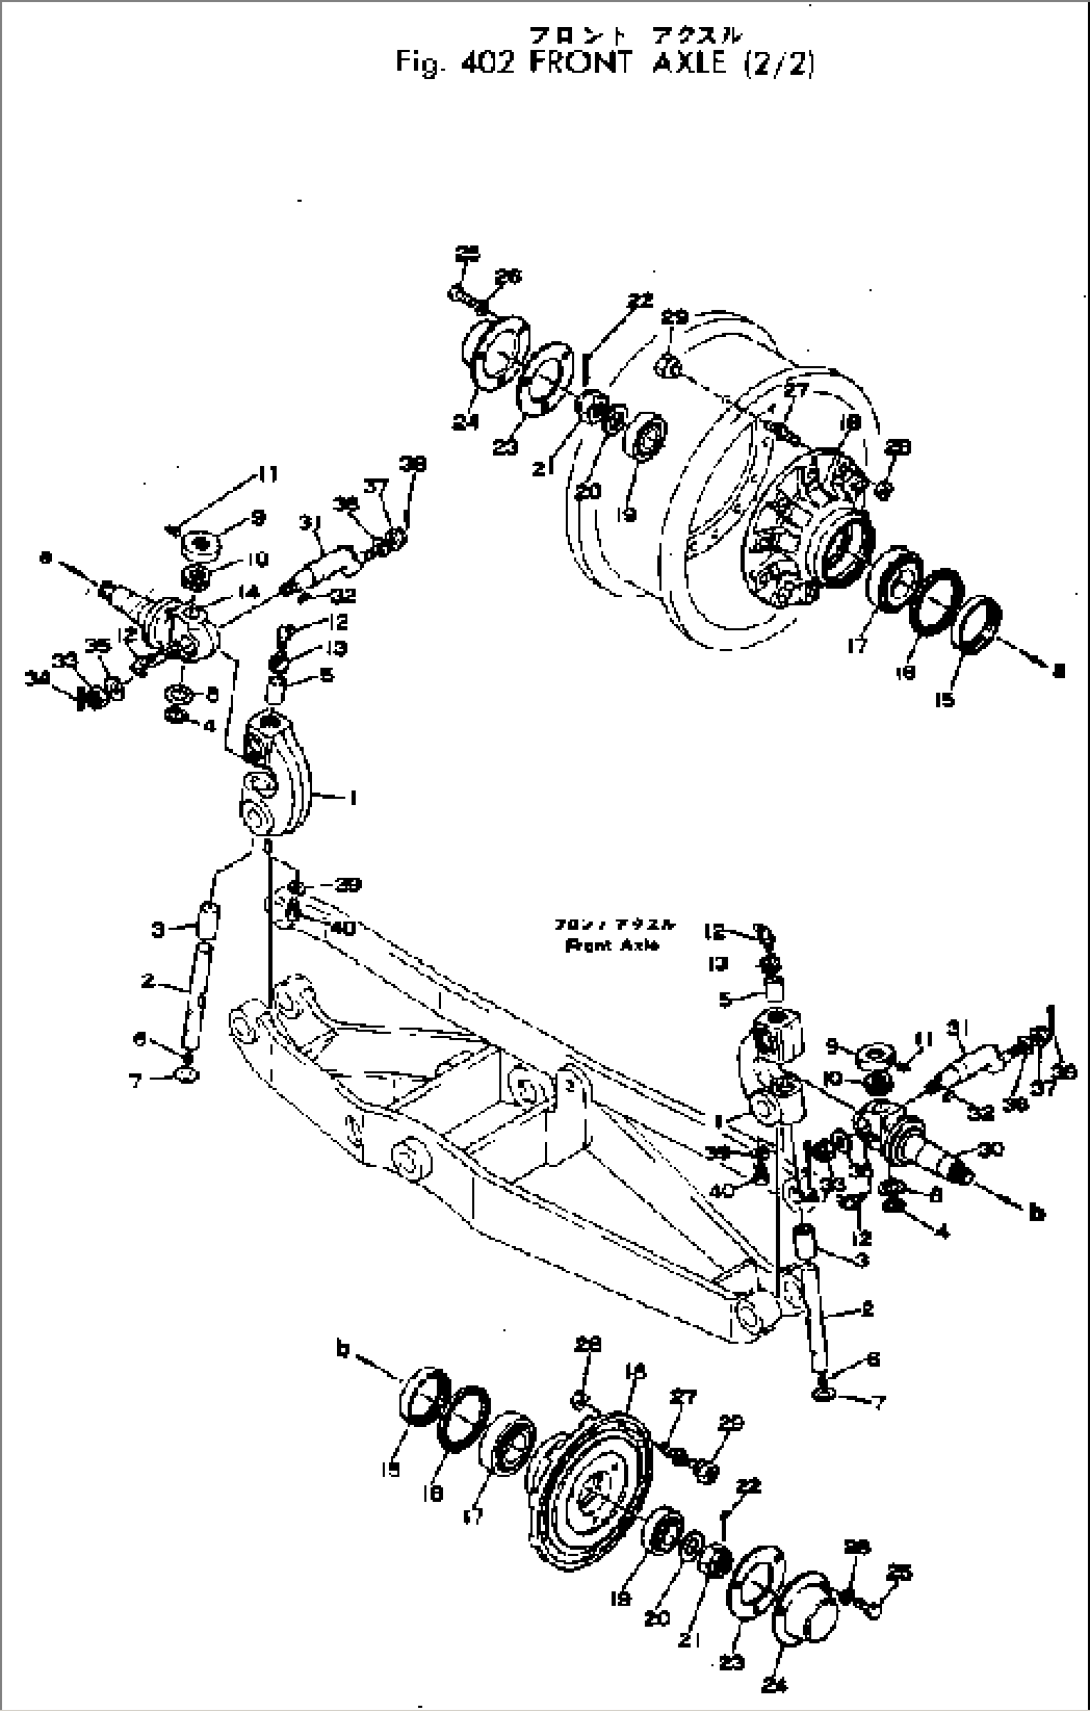 FRONT AXLE (2/2)